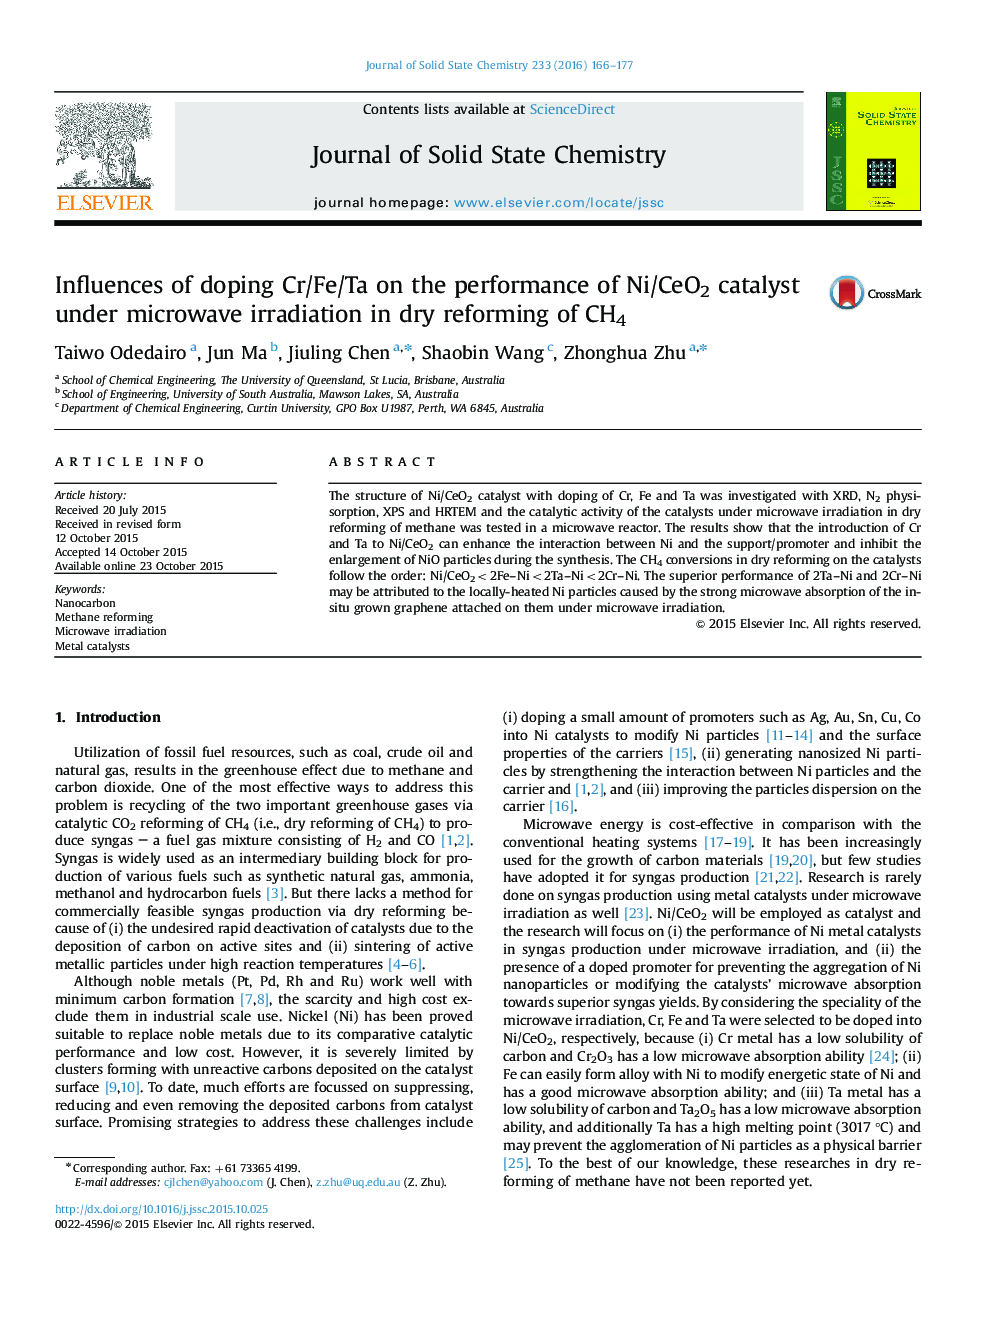 Influences of doping Cr/Fe/Ta on the performance of Ni/CeO2 catalyst under microwave irradiation in dry reforming of CH4